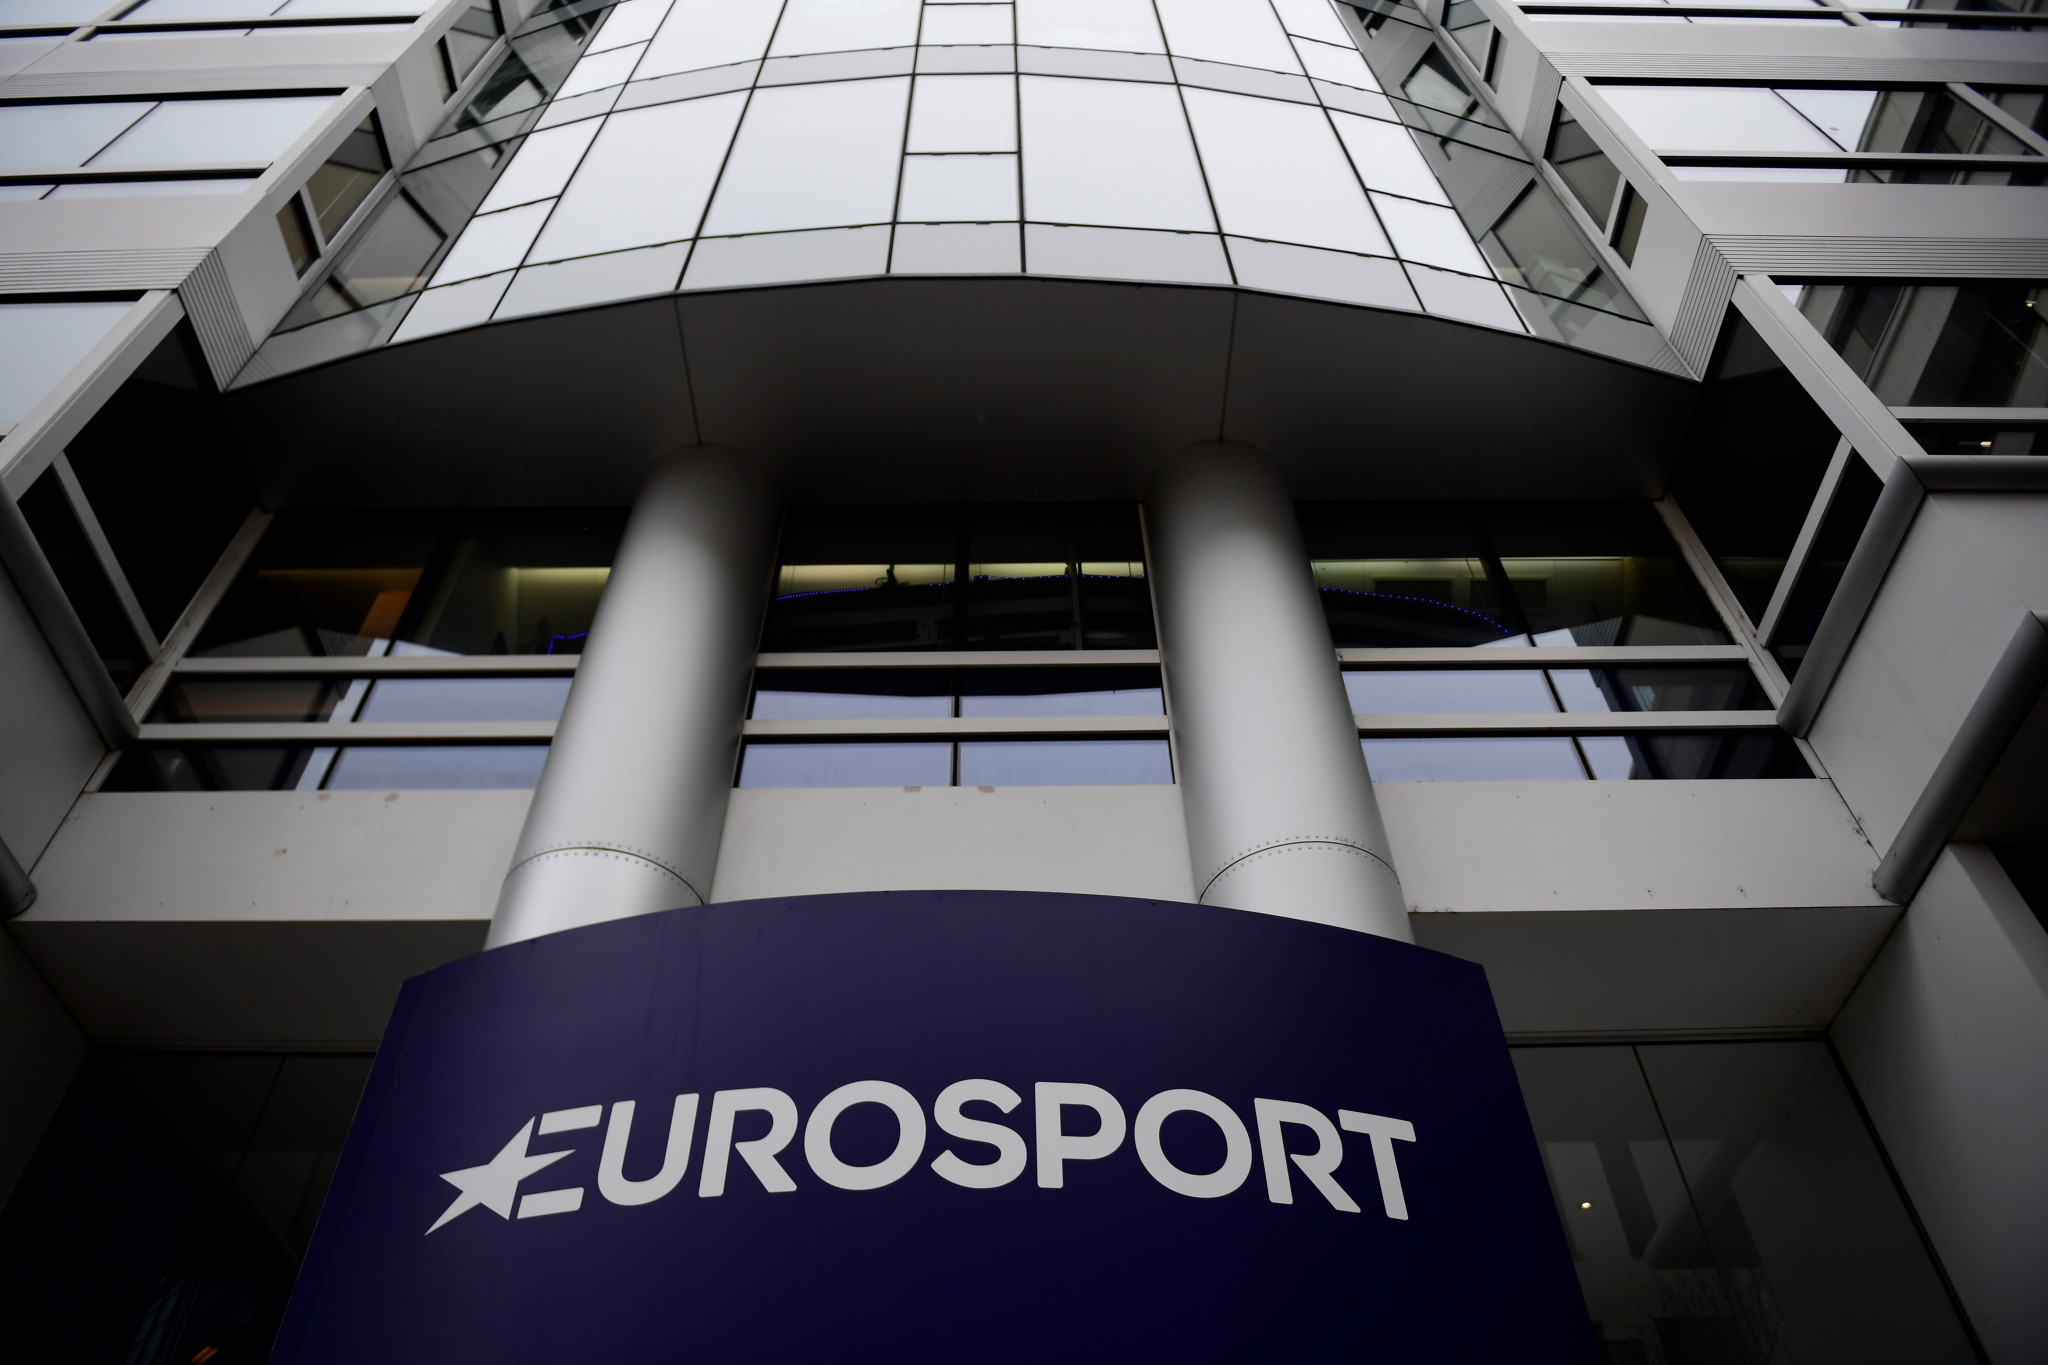 Discovery unveils new Eurosport management appointments with an eye on Tokyo 2020